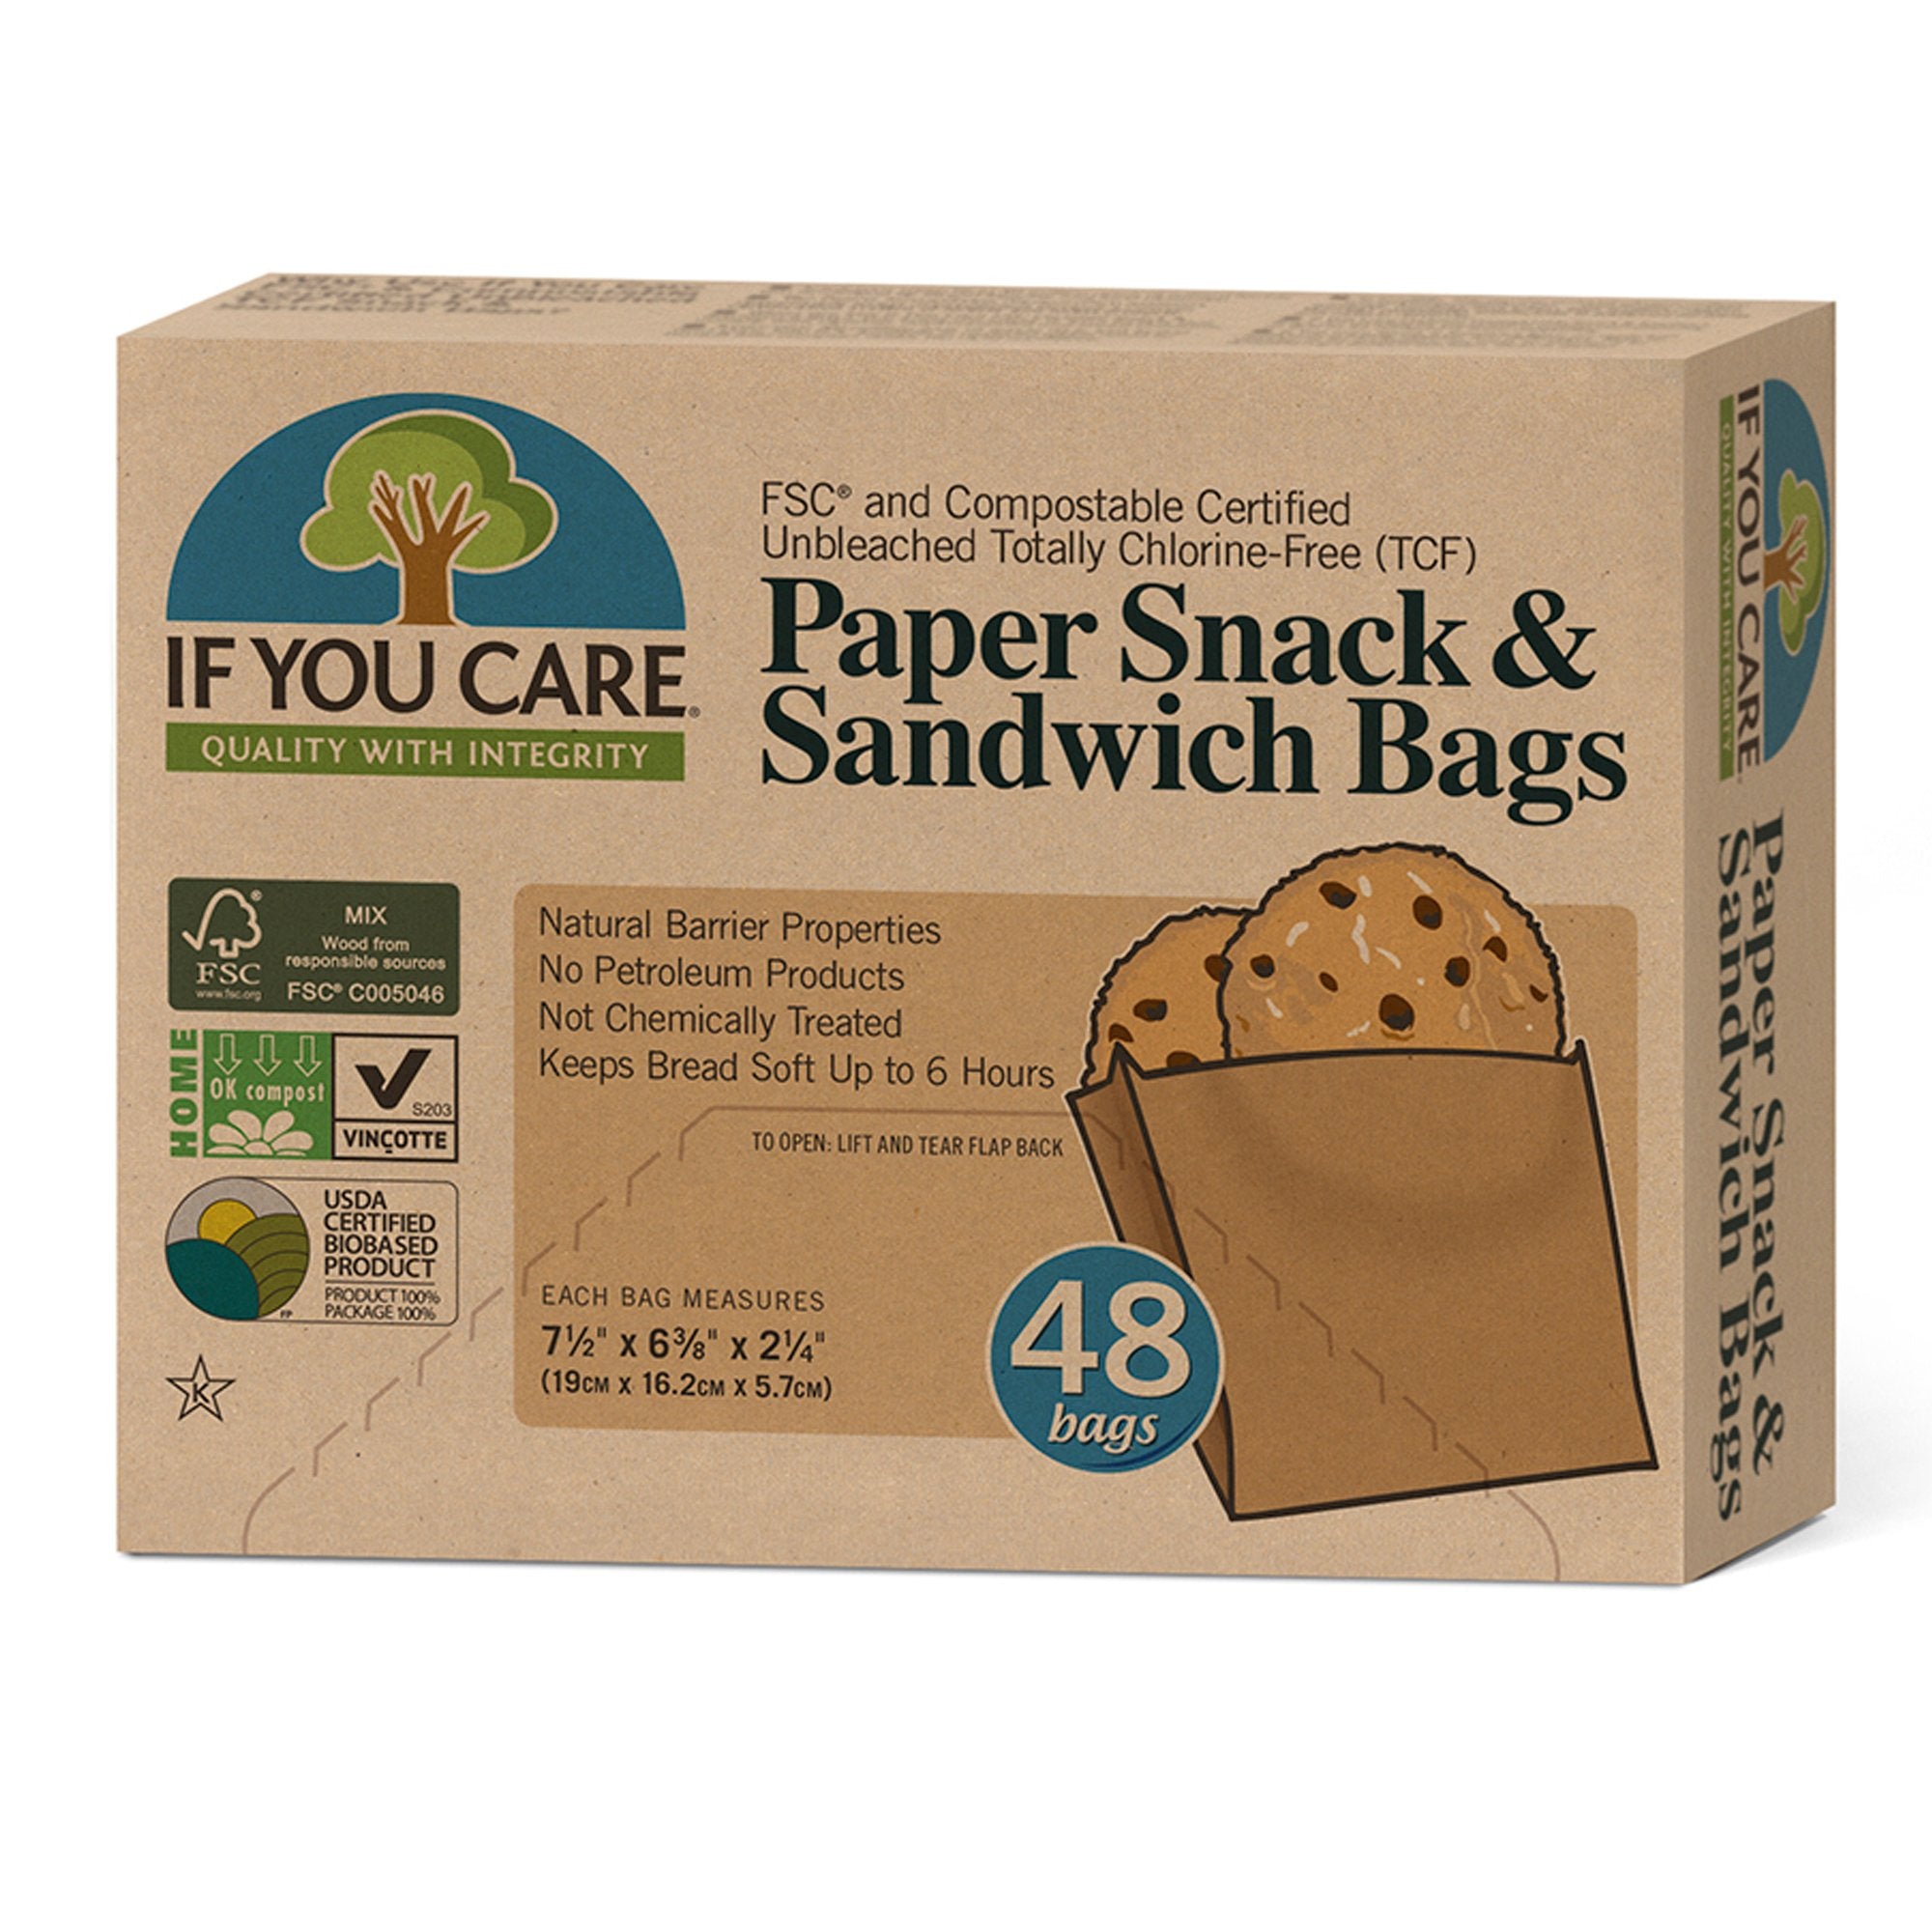 Responsible Products Certified Compostable Cling Wrap for Food, Zero Waste, Non-Toxic